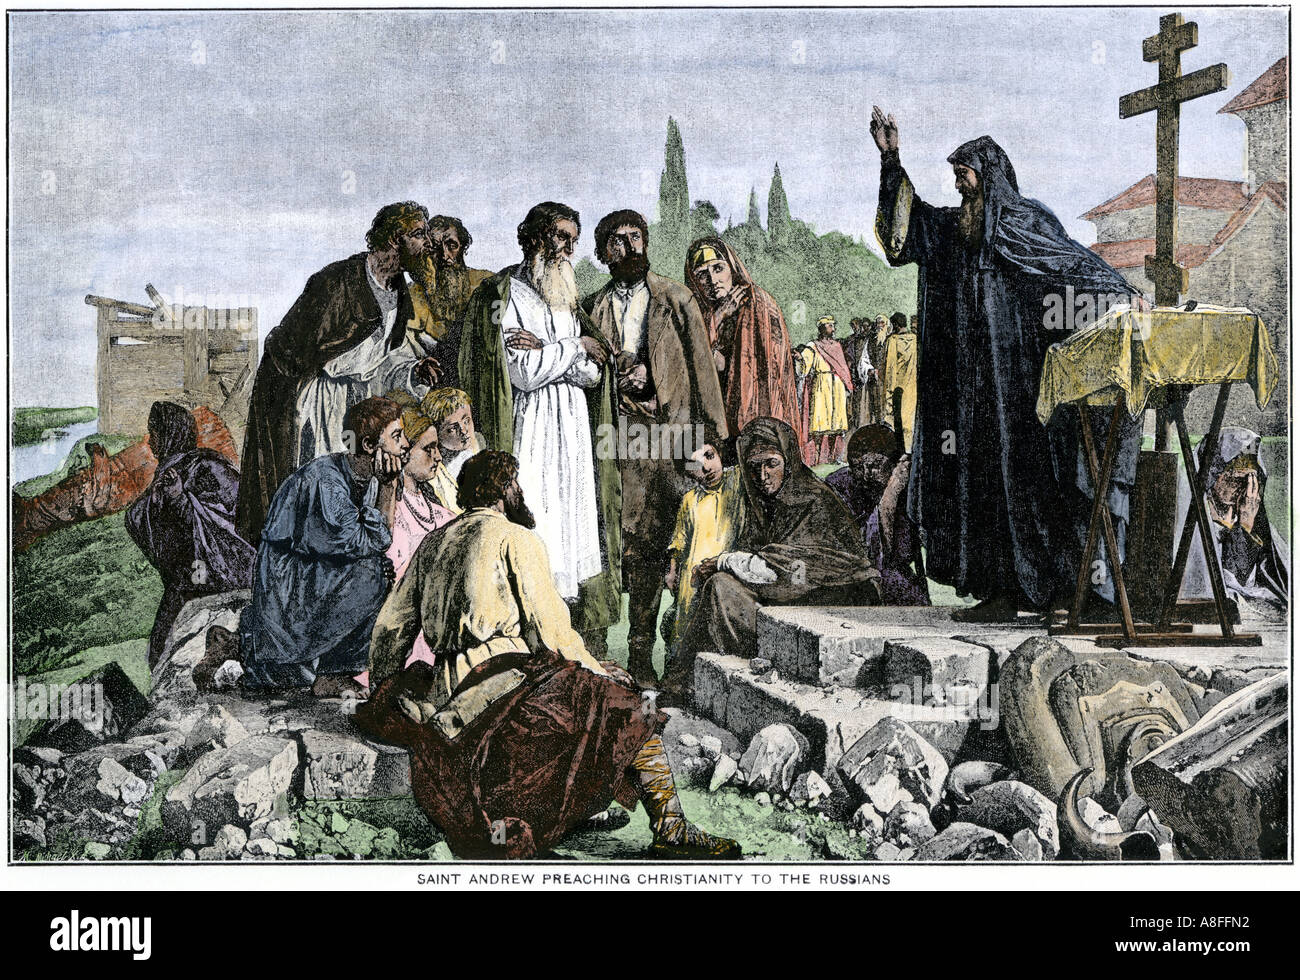 Apostle Andrew bringing Christianity to the Russians. Hand-colored halftone of an illustration Stock Photo